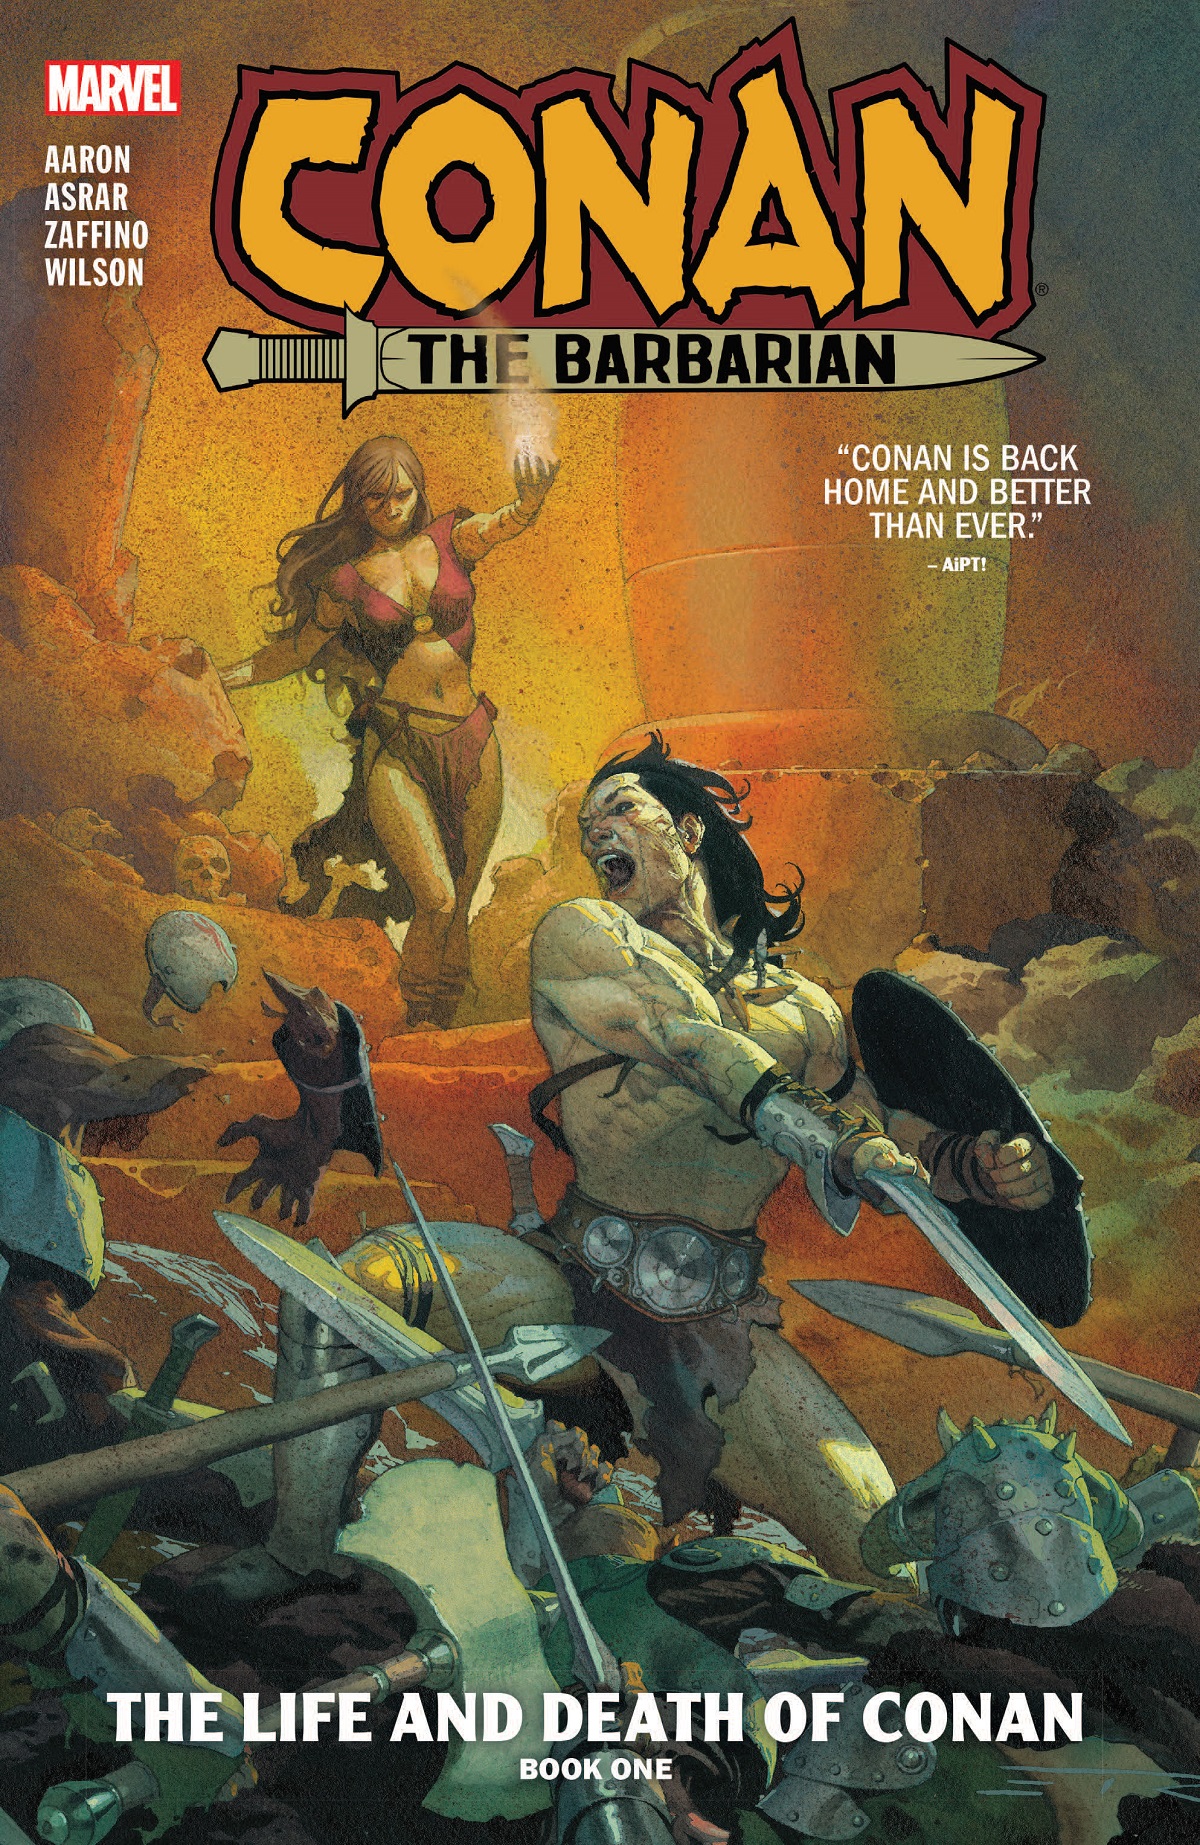 Conan The Barbarian Vol. 1: The Life And Death Of Conan Book One (Trade Paperback)